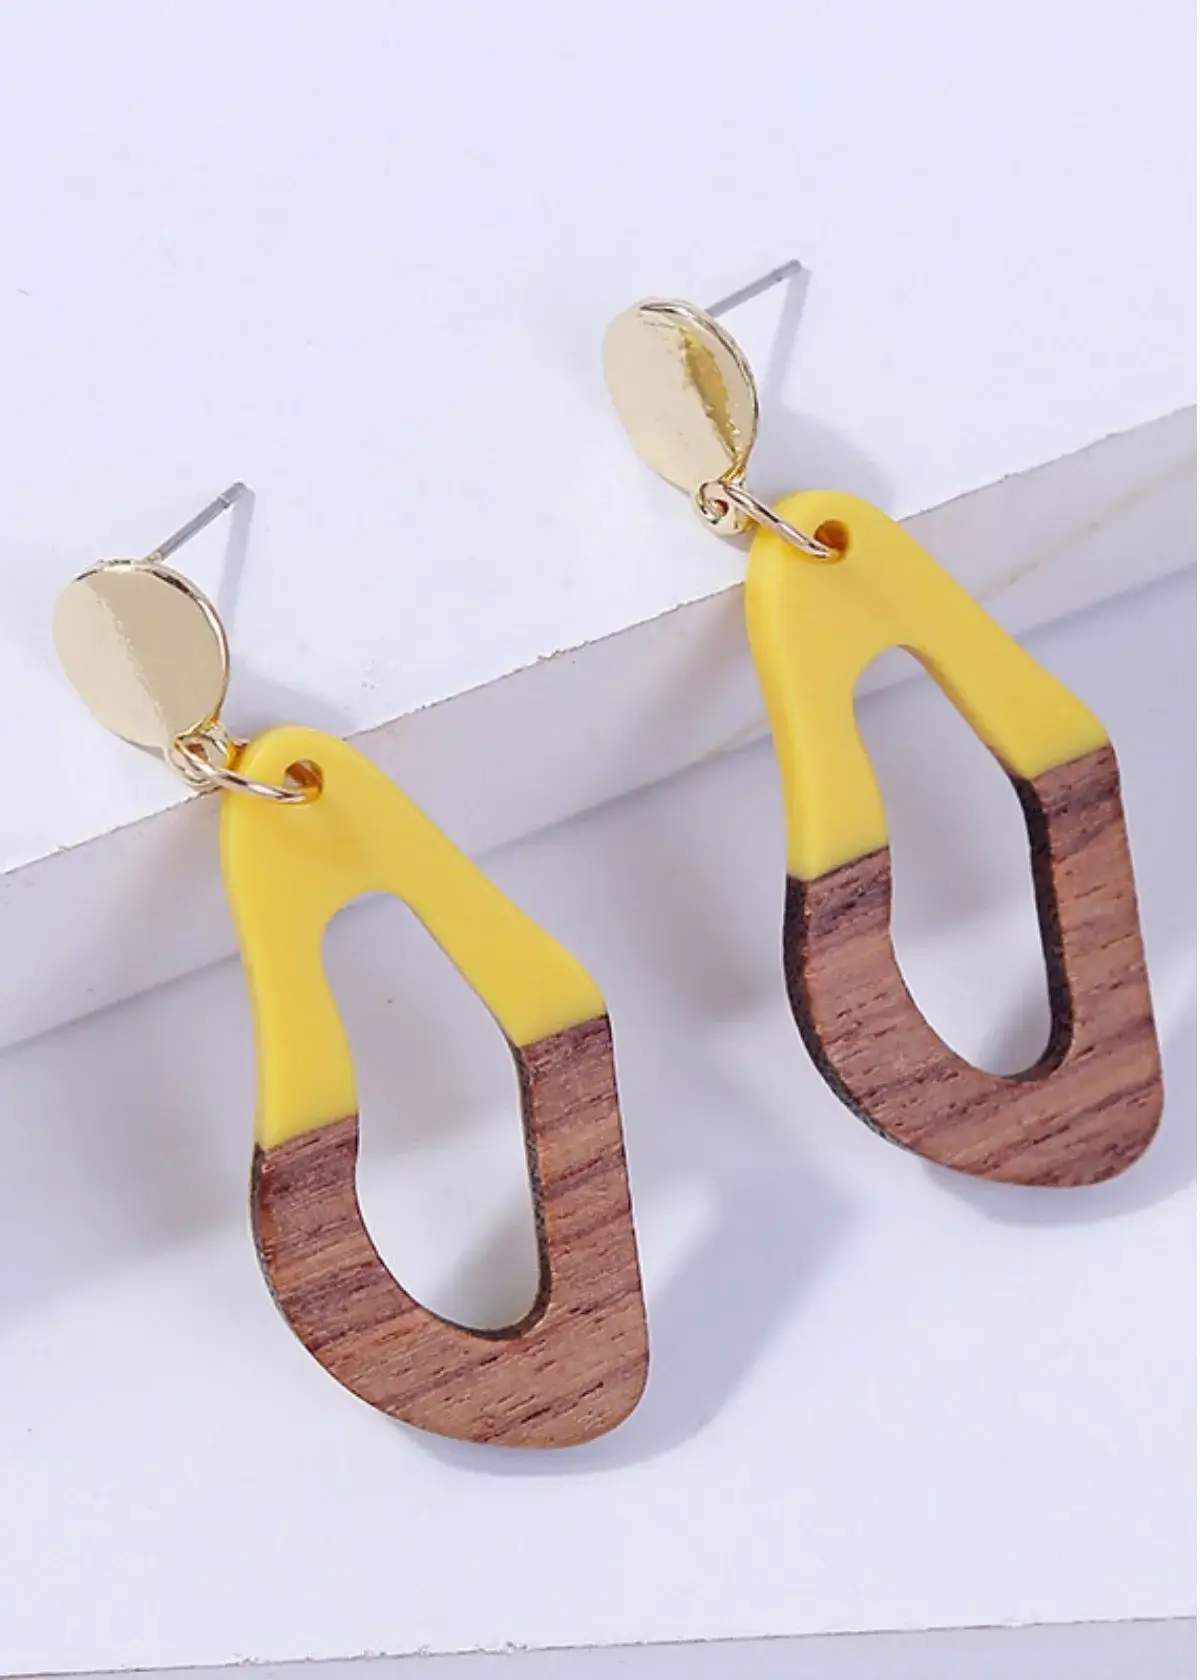 How to choose the right wood earring blanks?